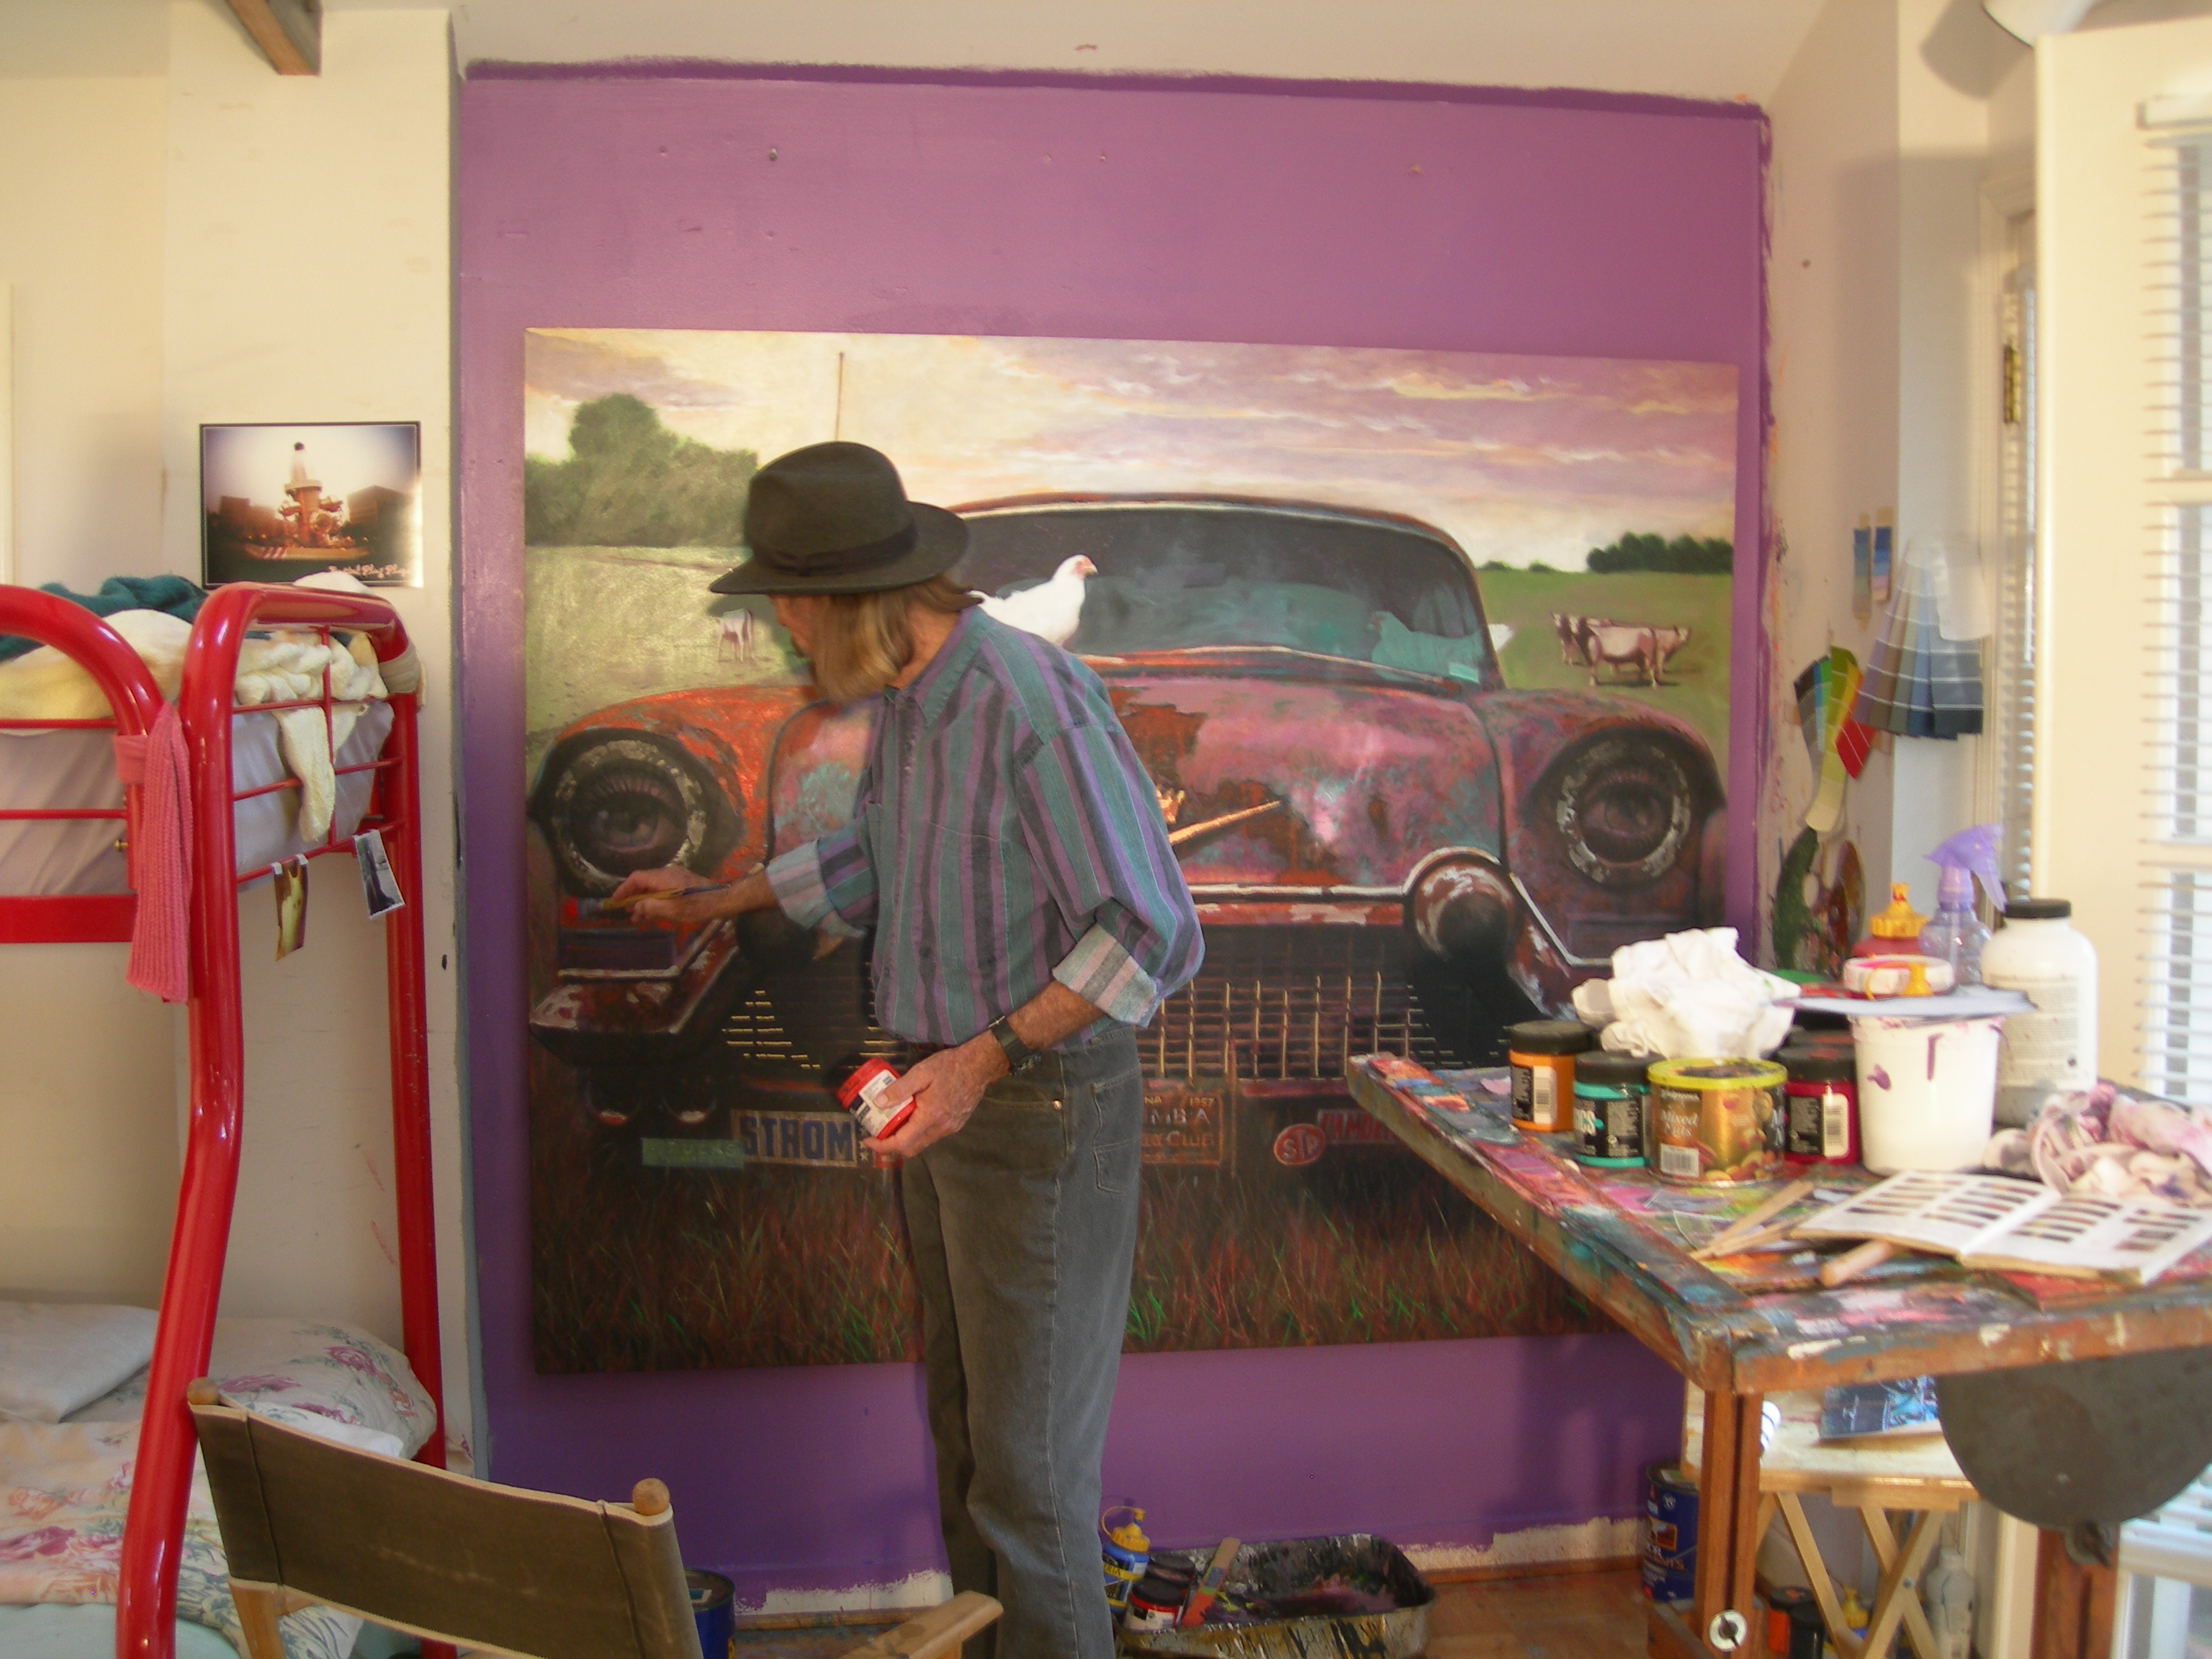  Coop de Ville, 2008, 60 inches by 72 inches. Blue paints in his studio, located in the backyard of his home. 
Photography courtesy of Lynn Sky